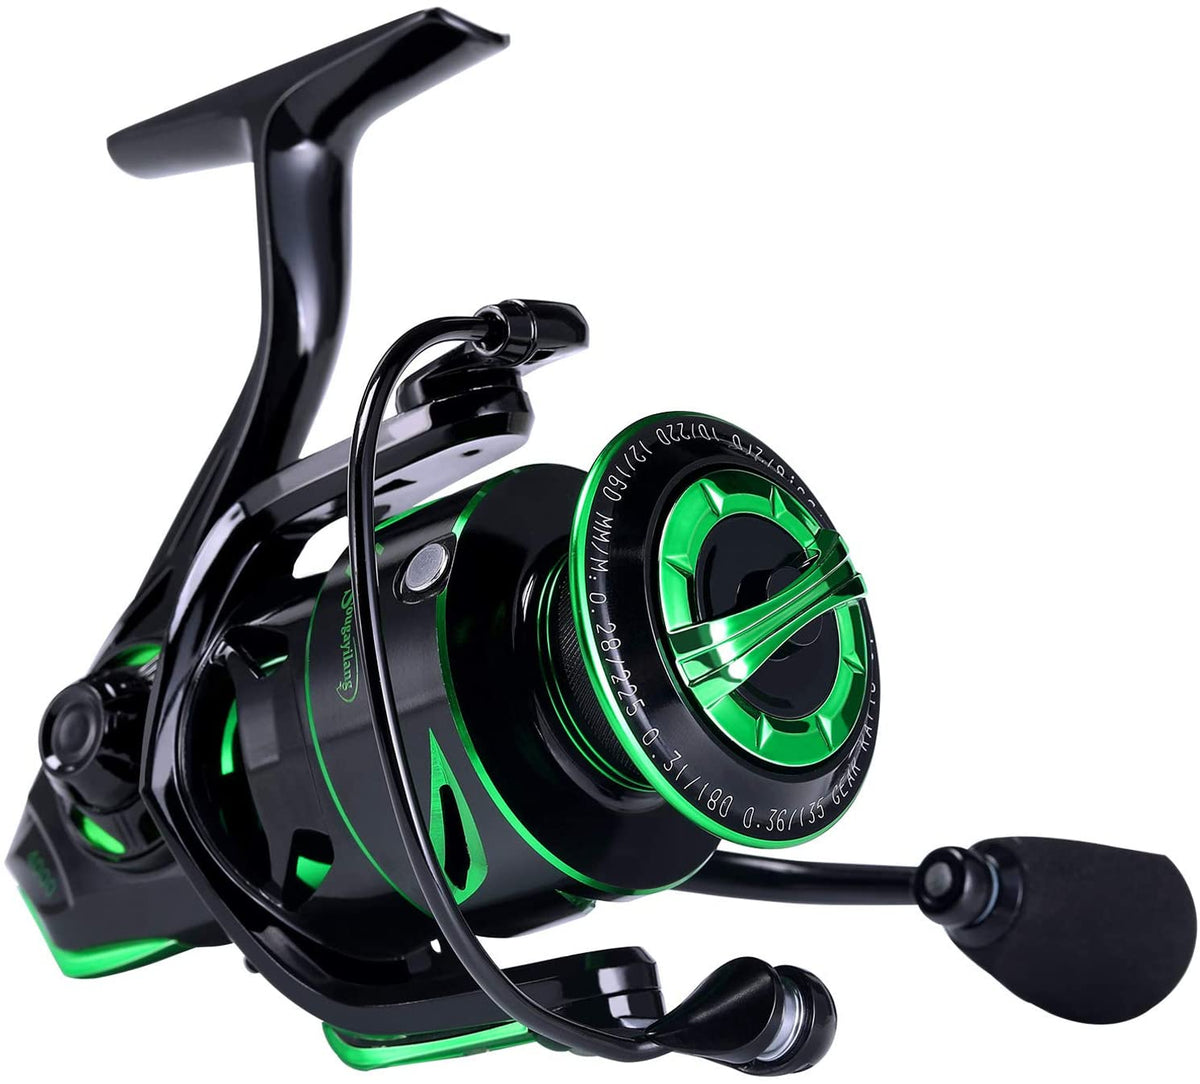 One Bass Fishing reels Light Weight Saltwater Spinning Reel - 39.5 LB  Carbon Fiber Drag,12+1 BB Ultra Smooth All Aluminum Inshore Reel for  Saltwater or Freshwater – Sougayilang